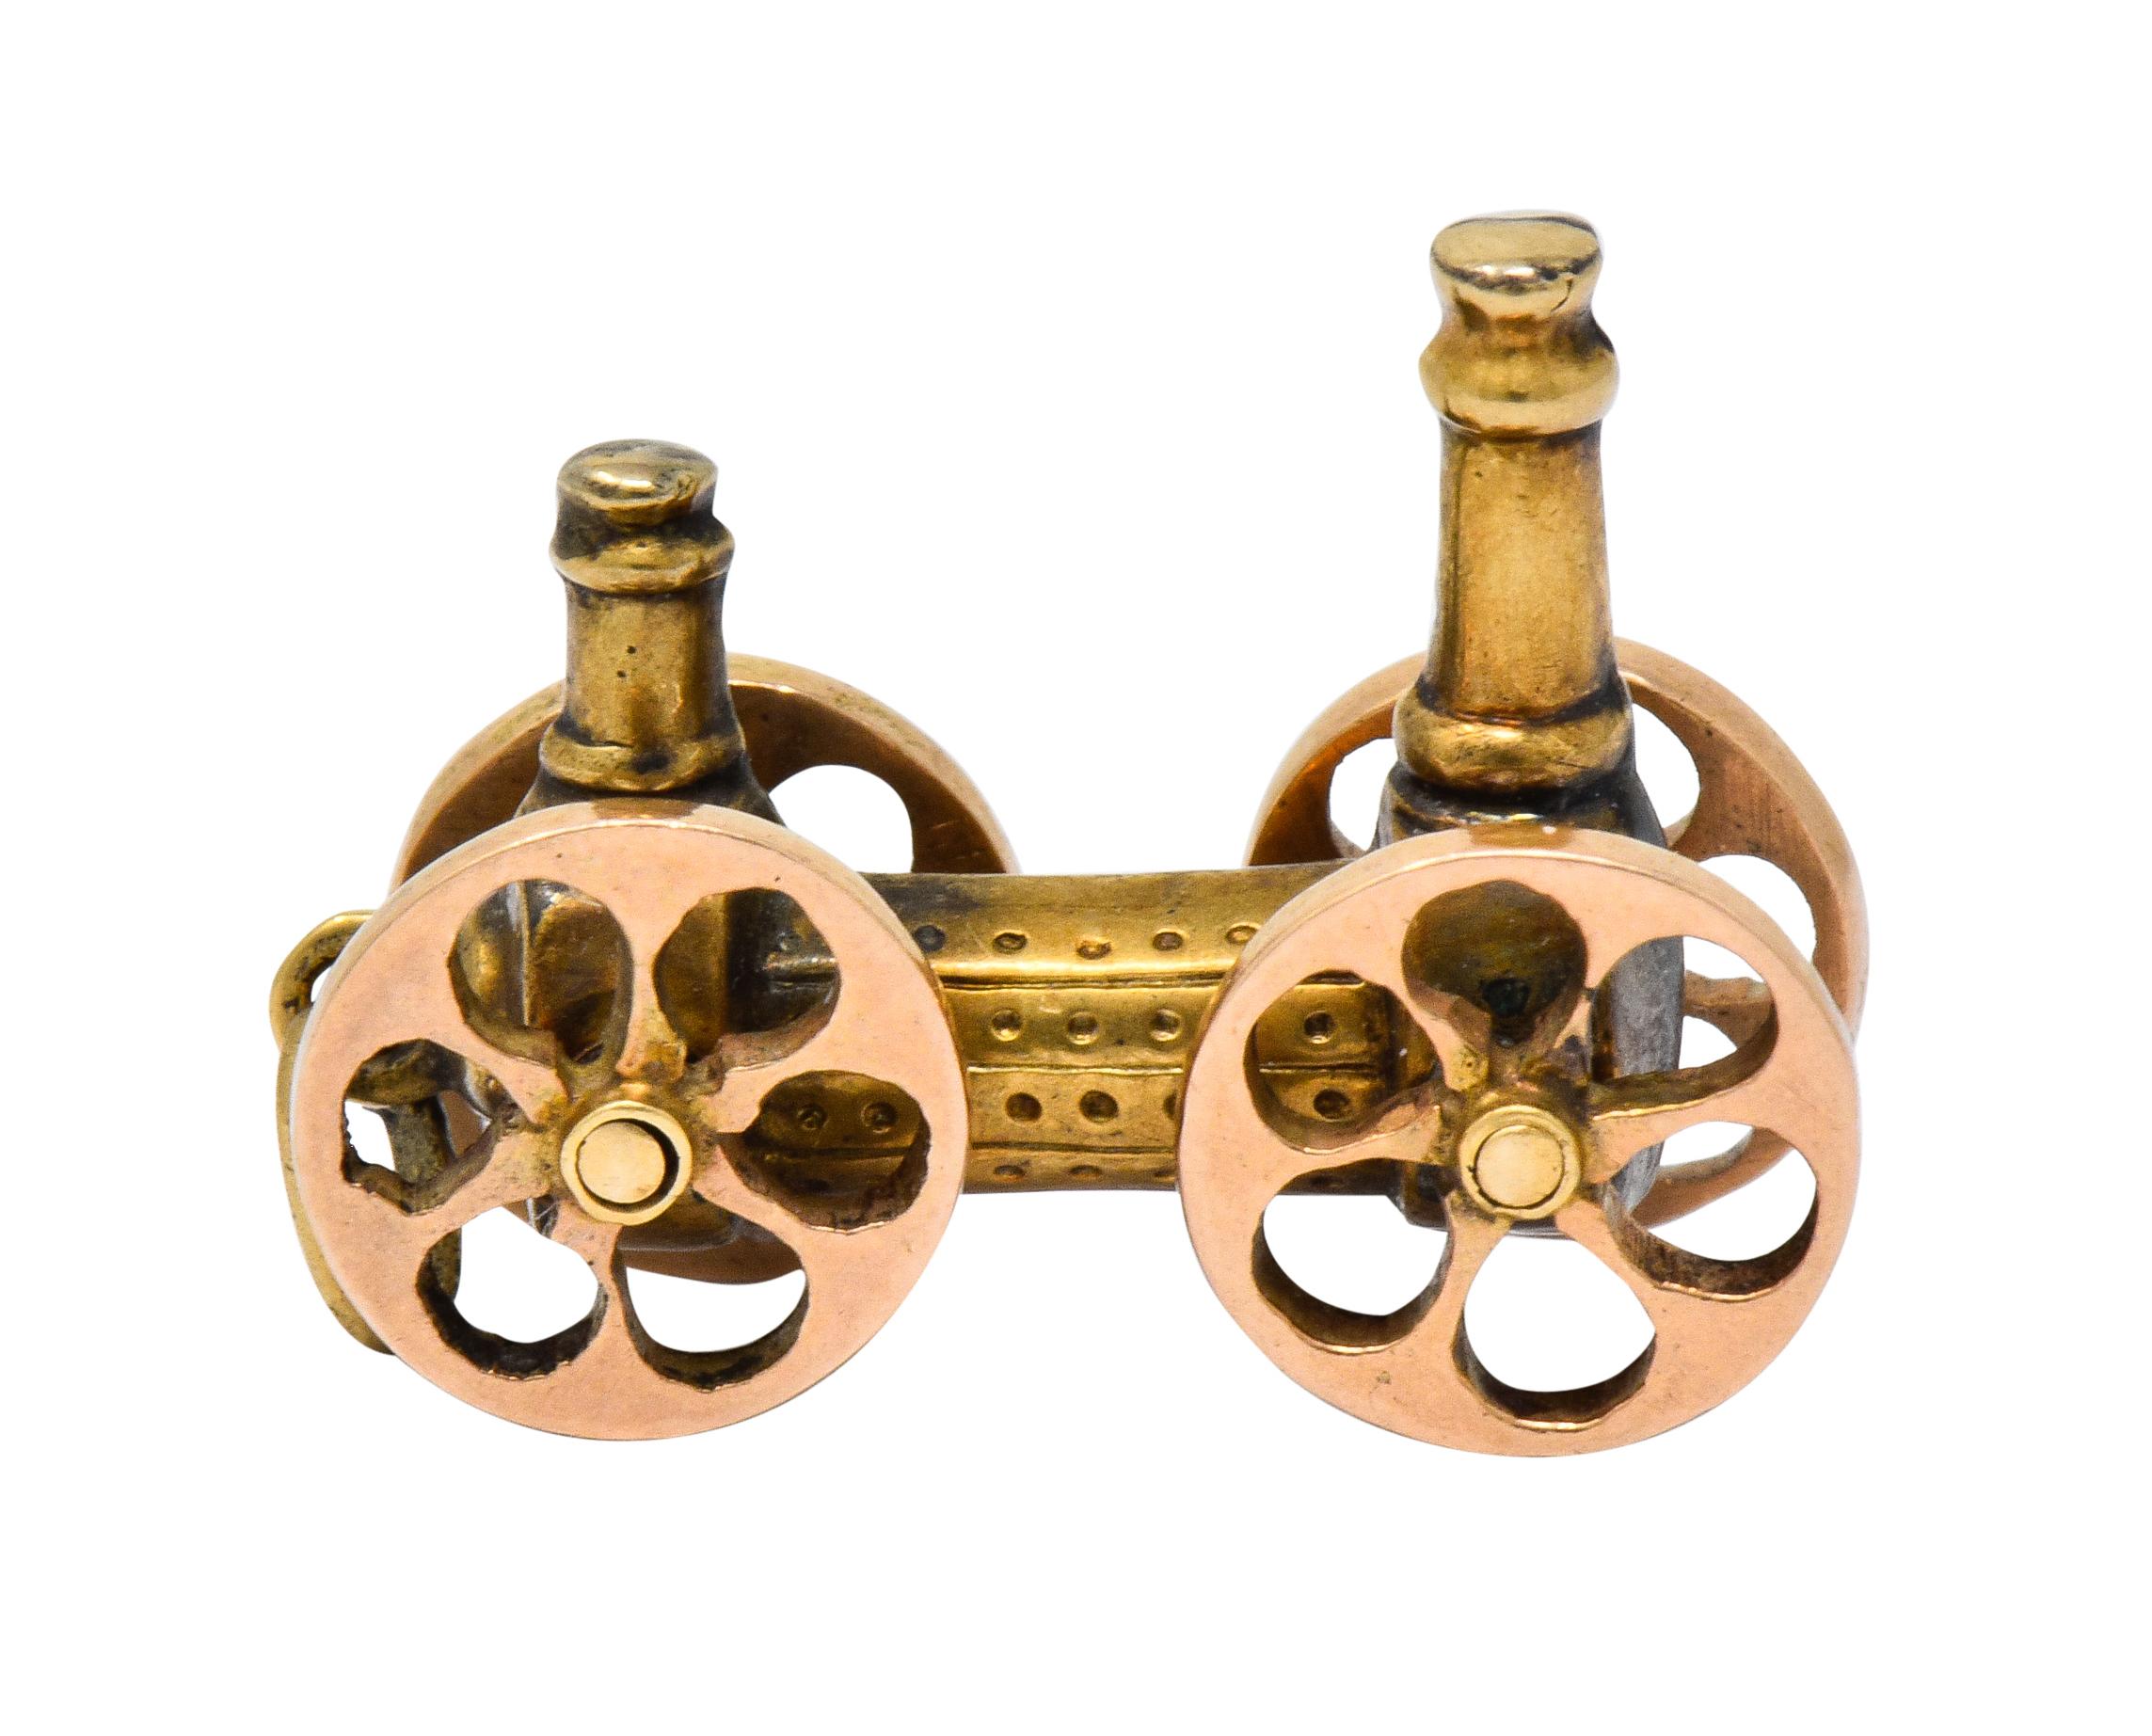 Charm designed as an early Royal George style steam engine locomotive featuring two cylindrical exhausts

Adorned by large articulated wheels with radiating spokes

Completed by jump ring bale

Tested as 18 karat gold

Circa: 1880

Measures: 3/8 x